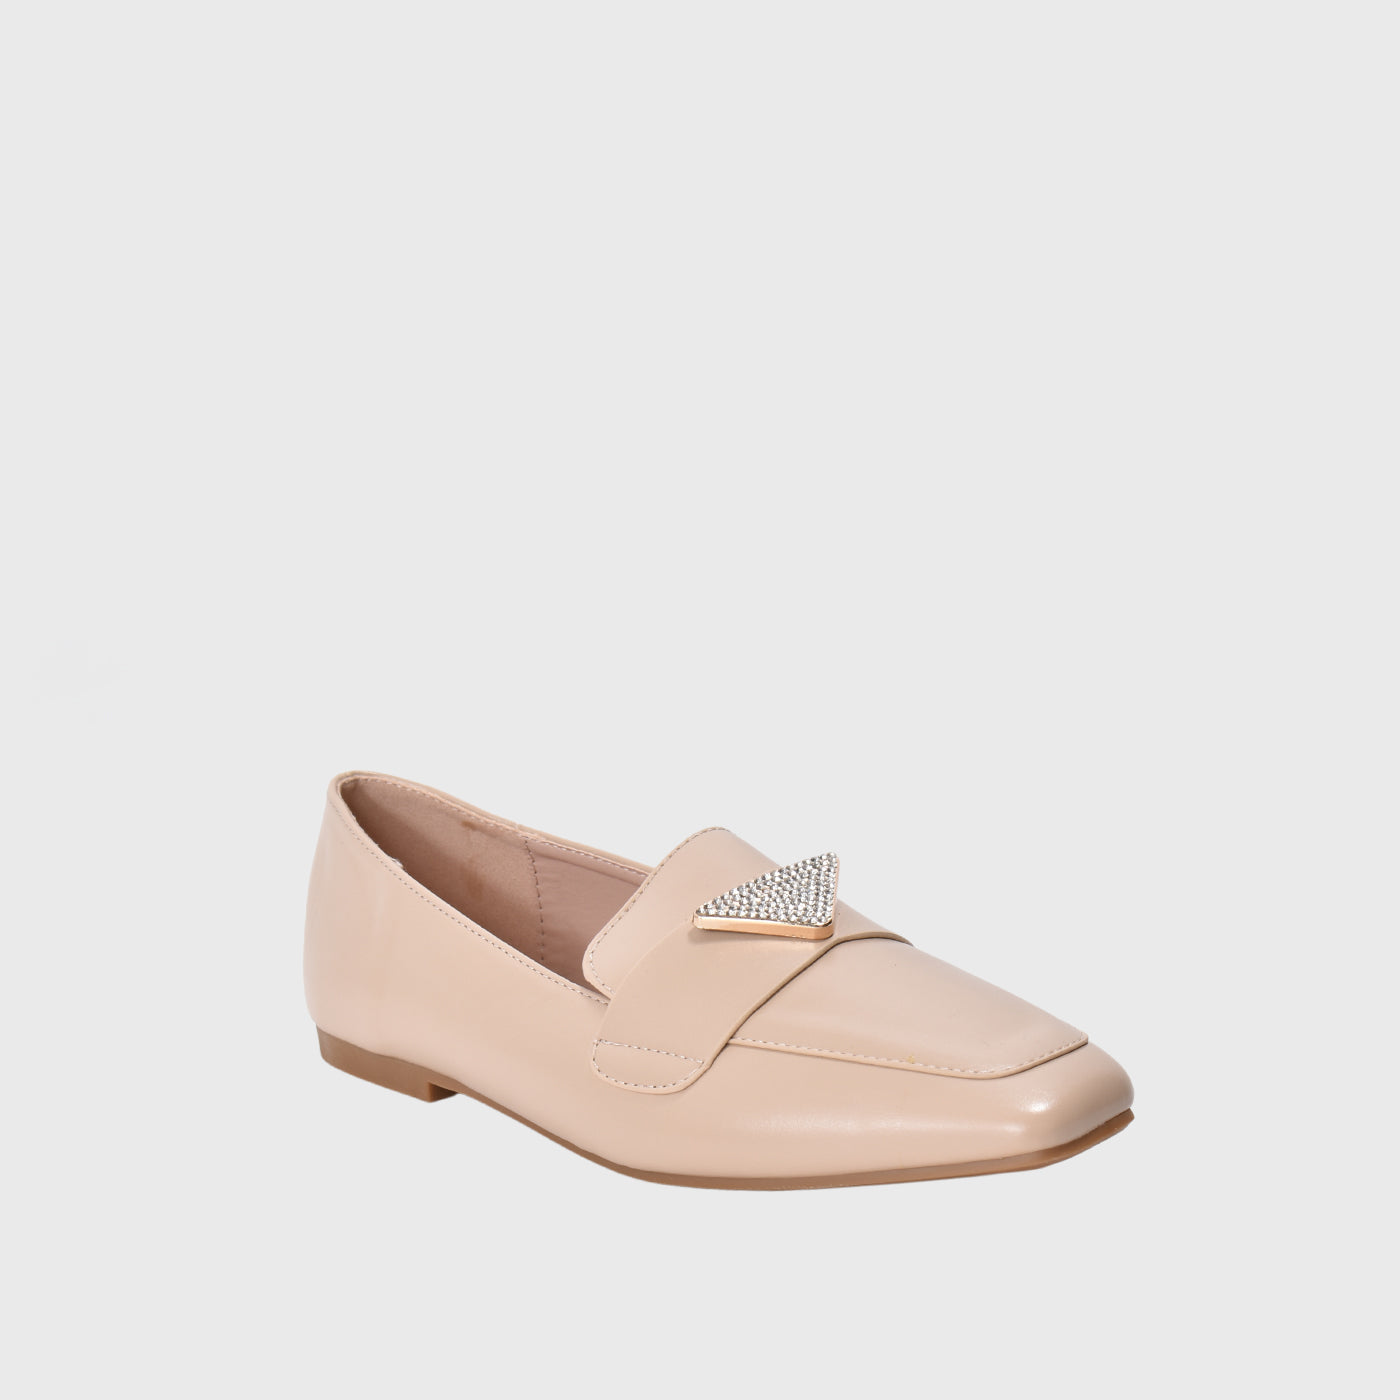 Beige Leather Flat Shoe With Studs